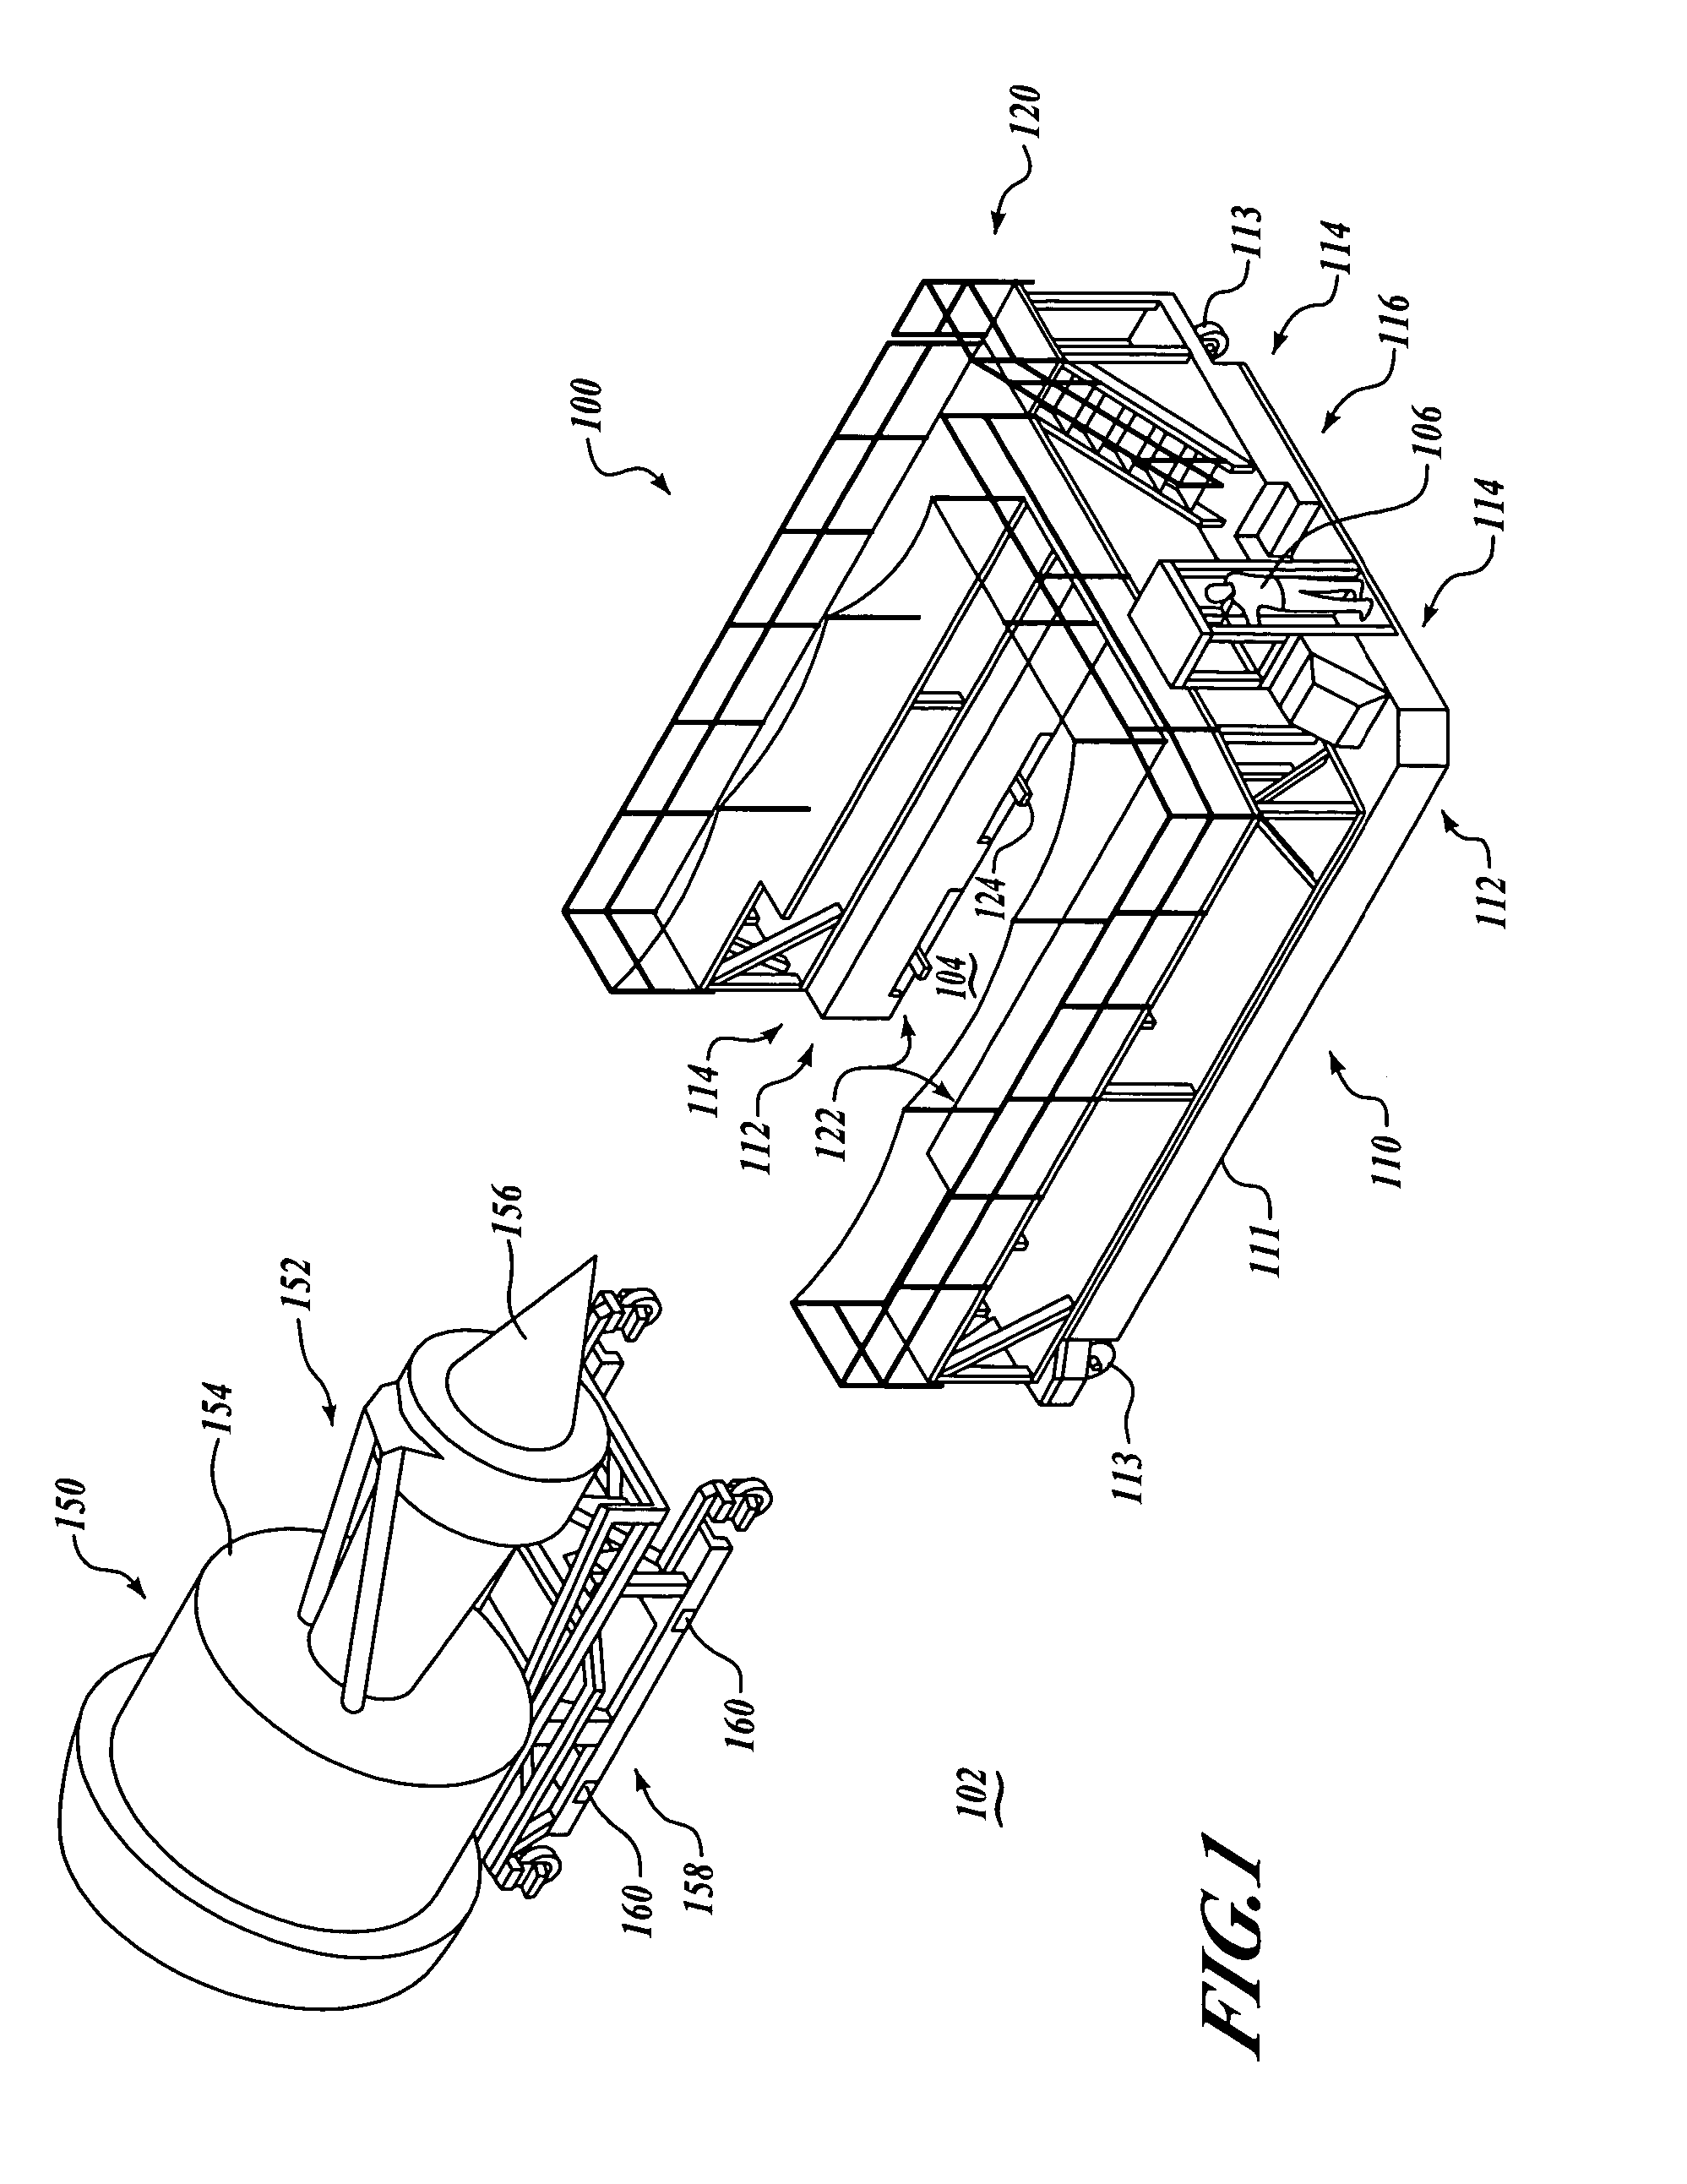 Engine loader and transporter apparatus and methods